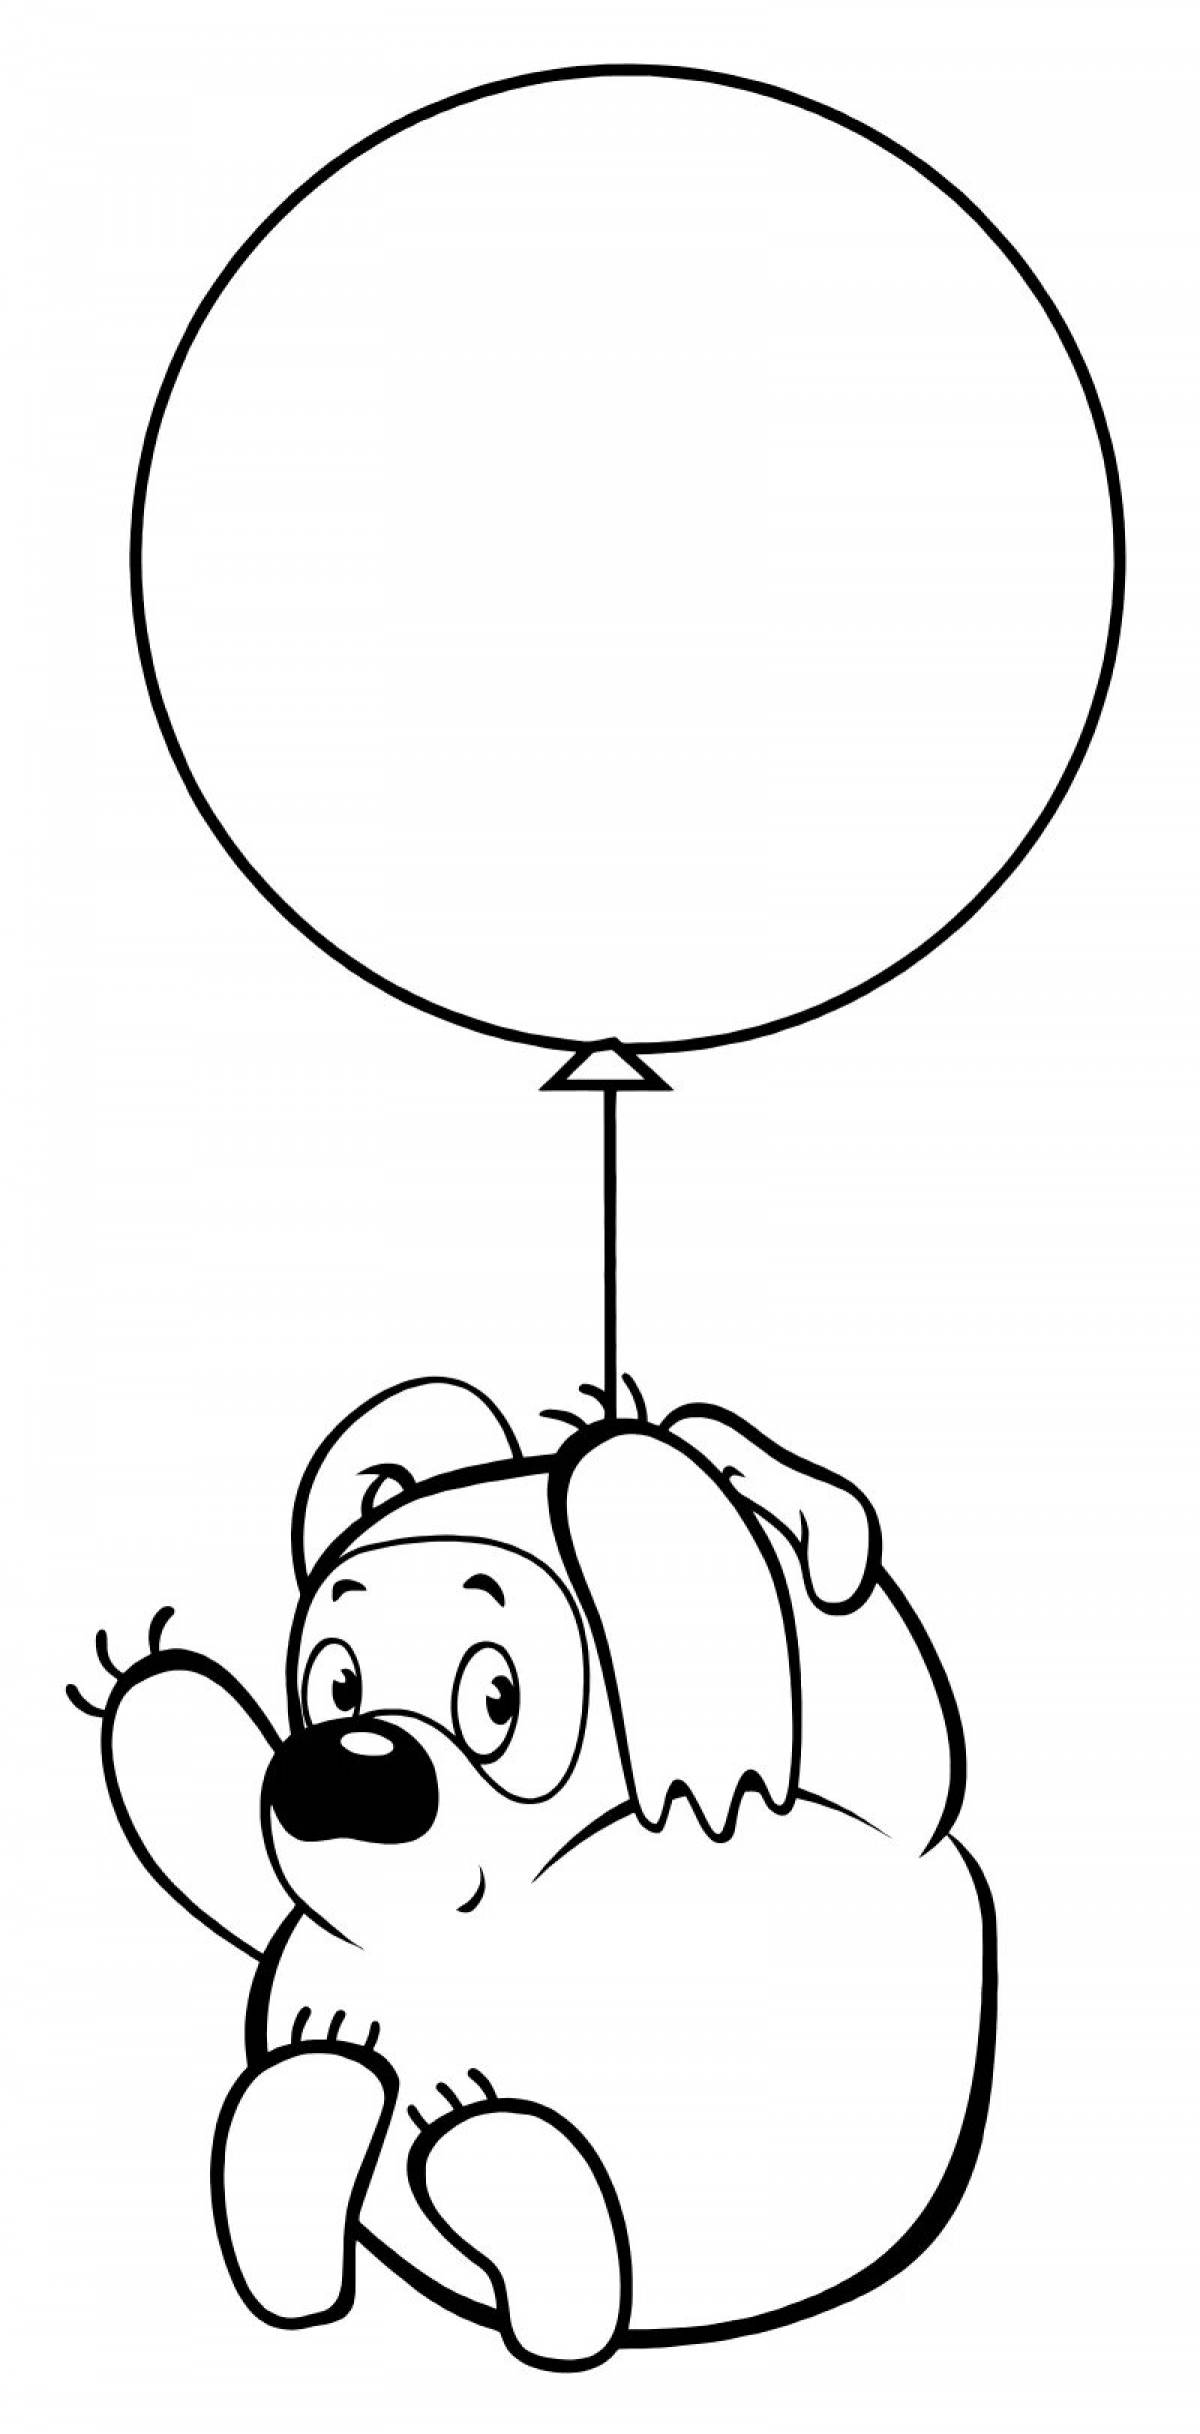 Winnie the pooh with balloon #17